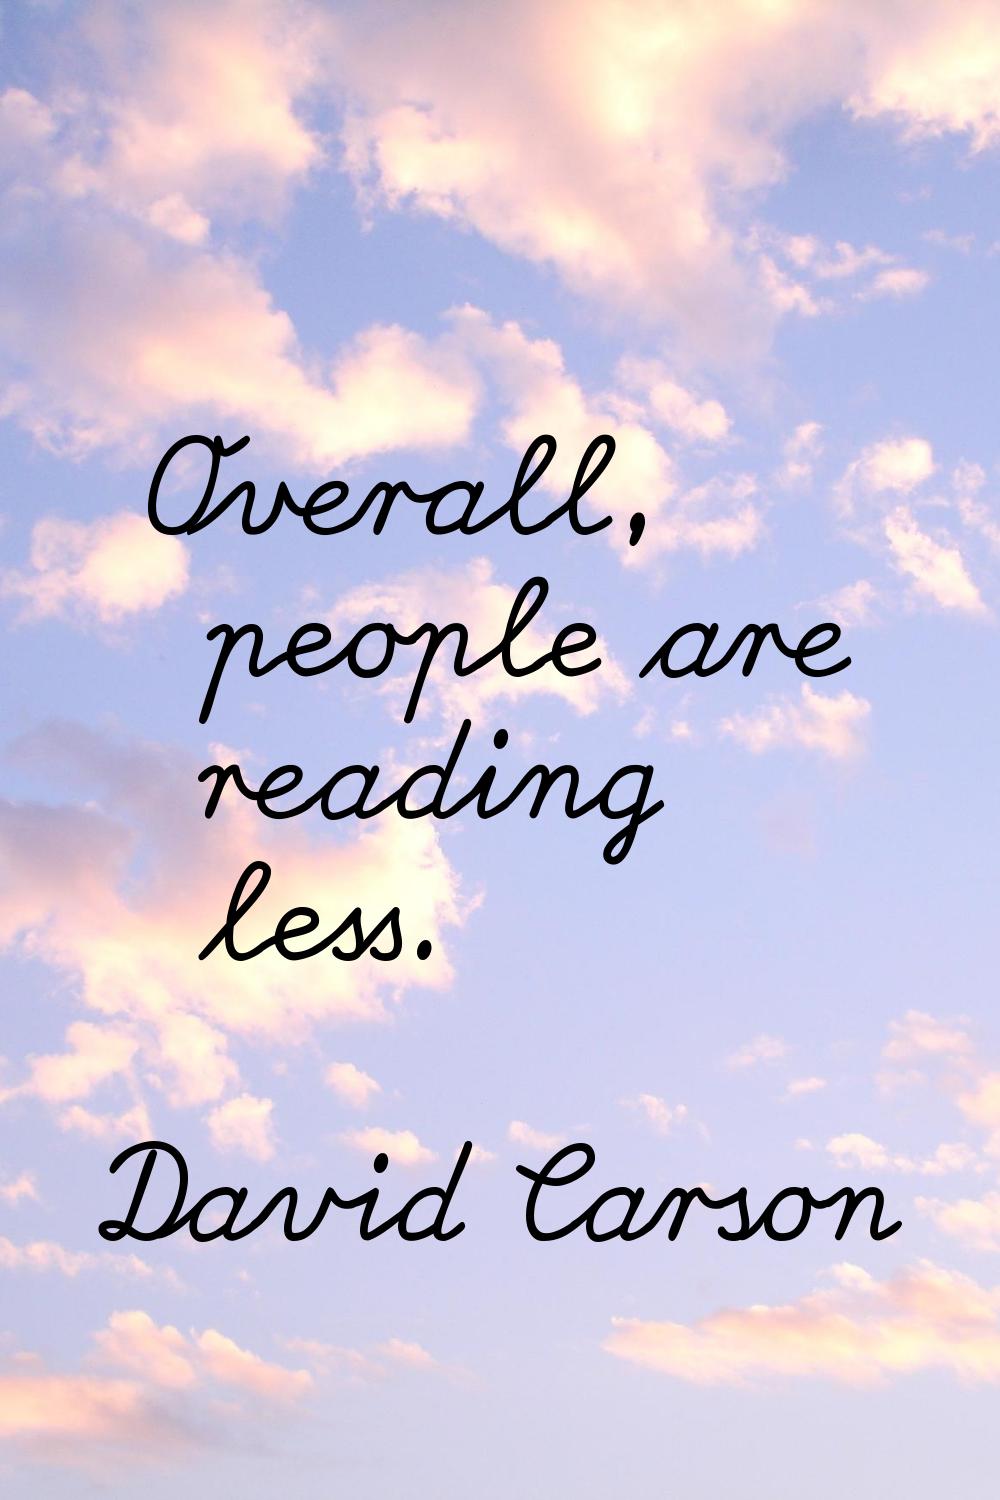 Overall, people are reading less.